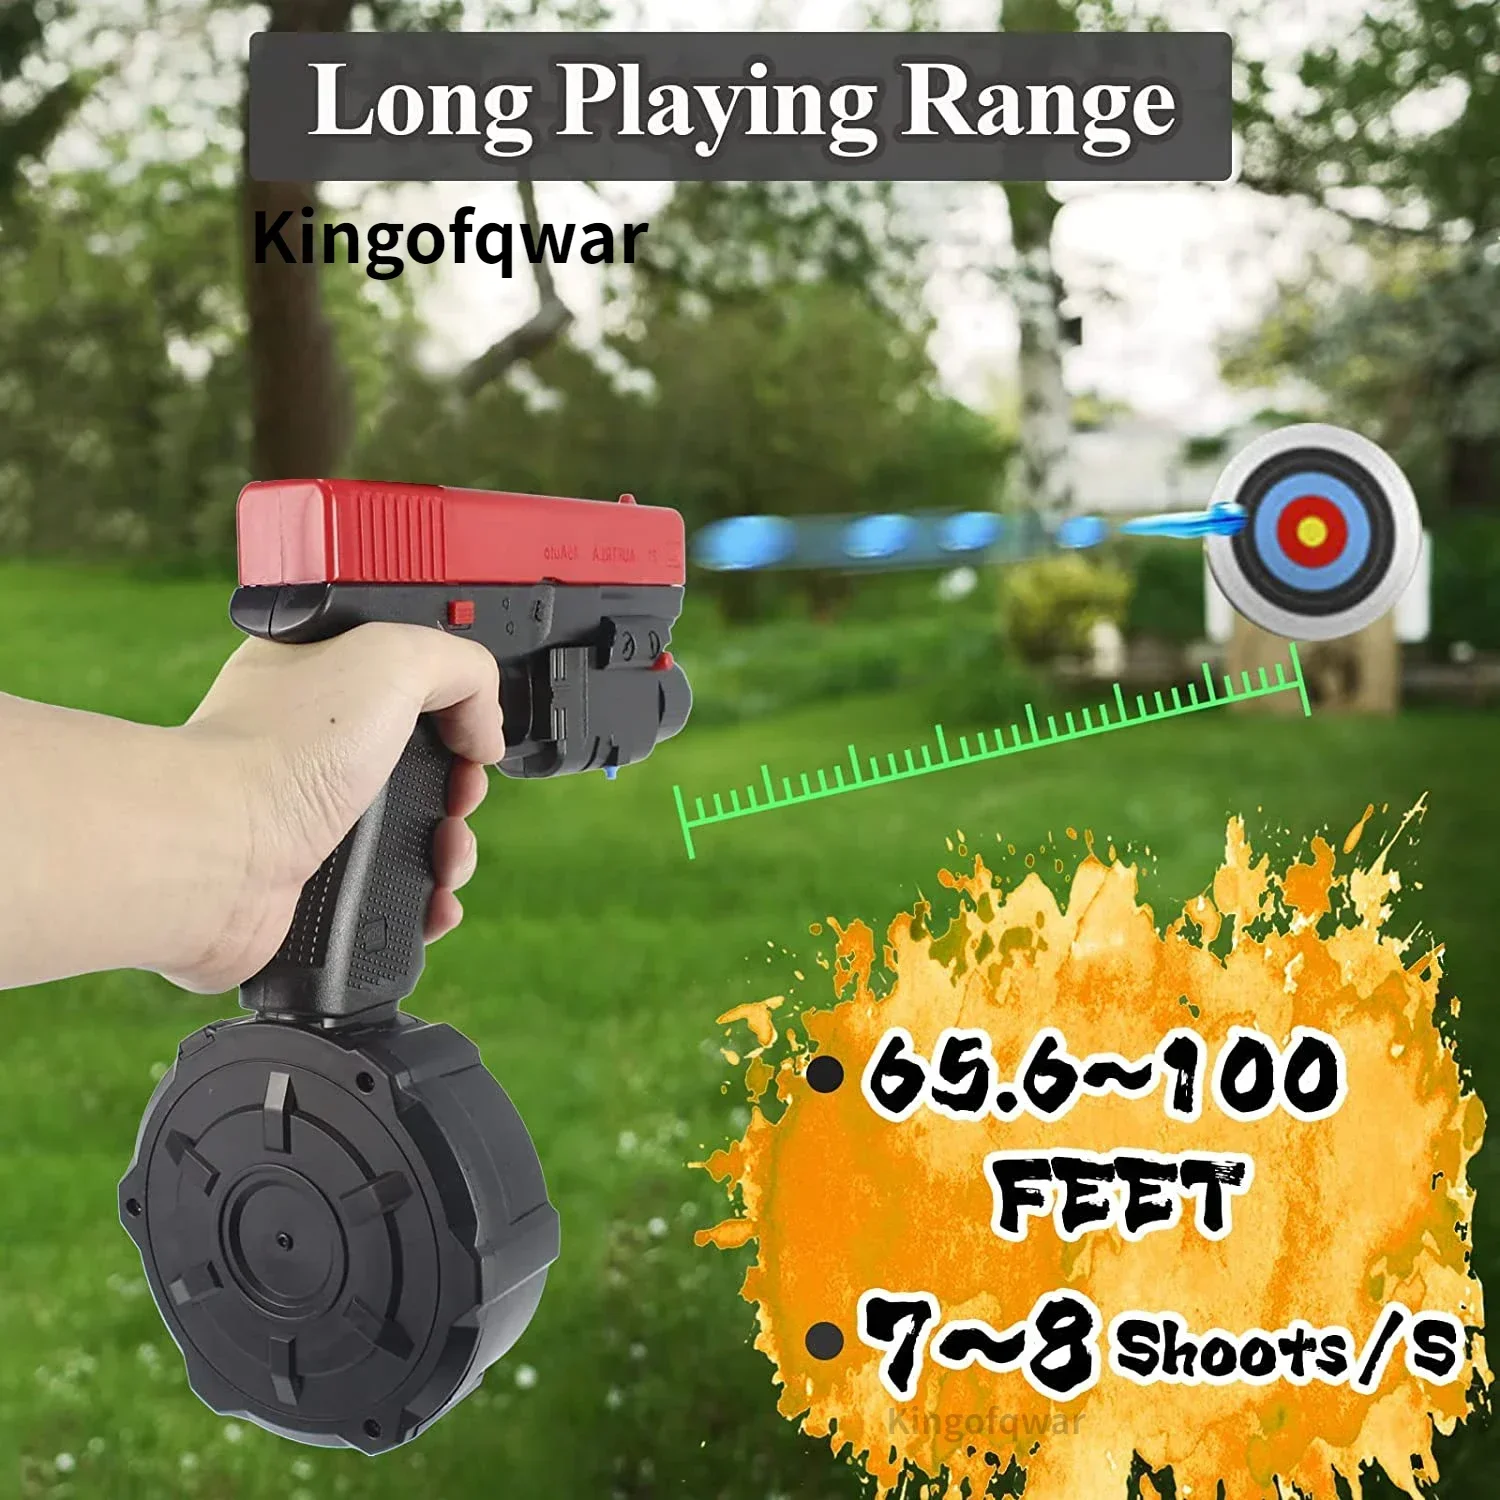 

New Electric Toy Gun Water Ball Beads Bullets Gun Outdoor CS Fighting Shooting Games for Kids Adult Christmas Gift